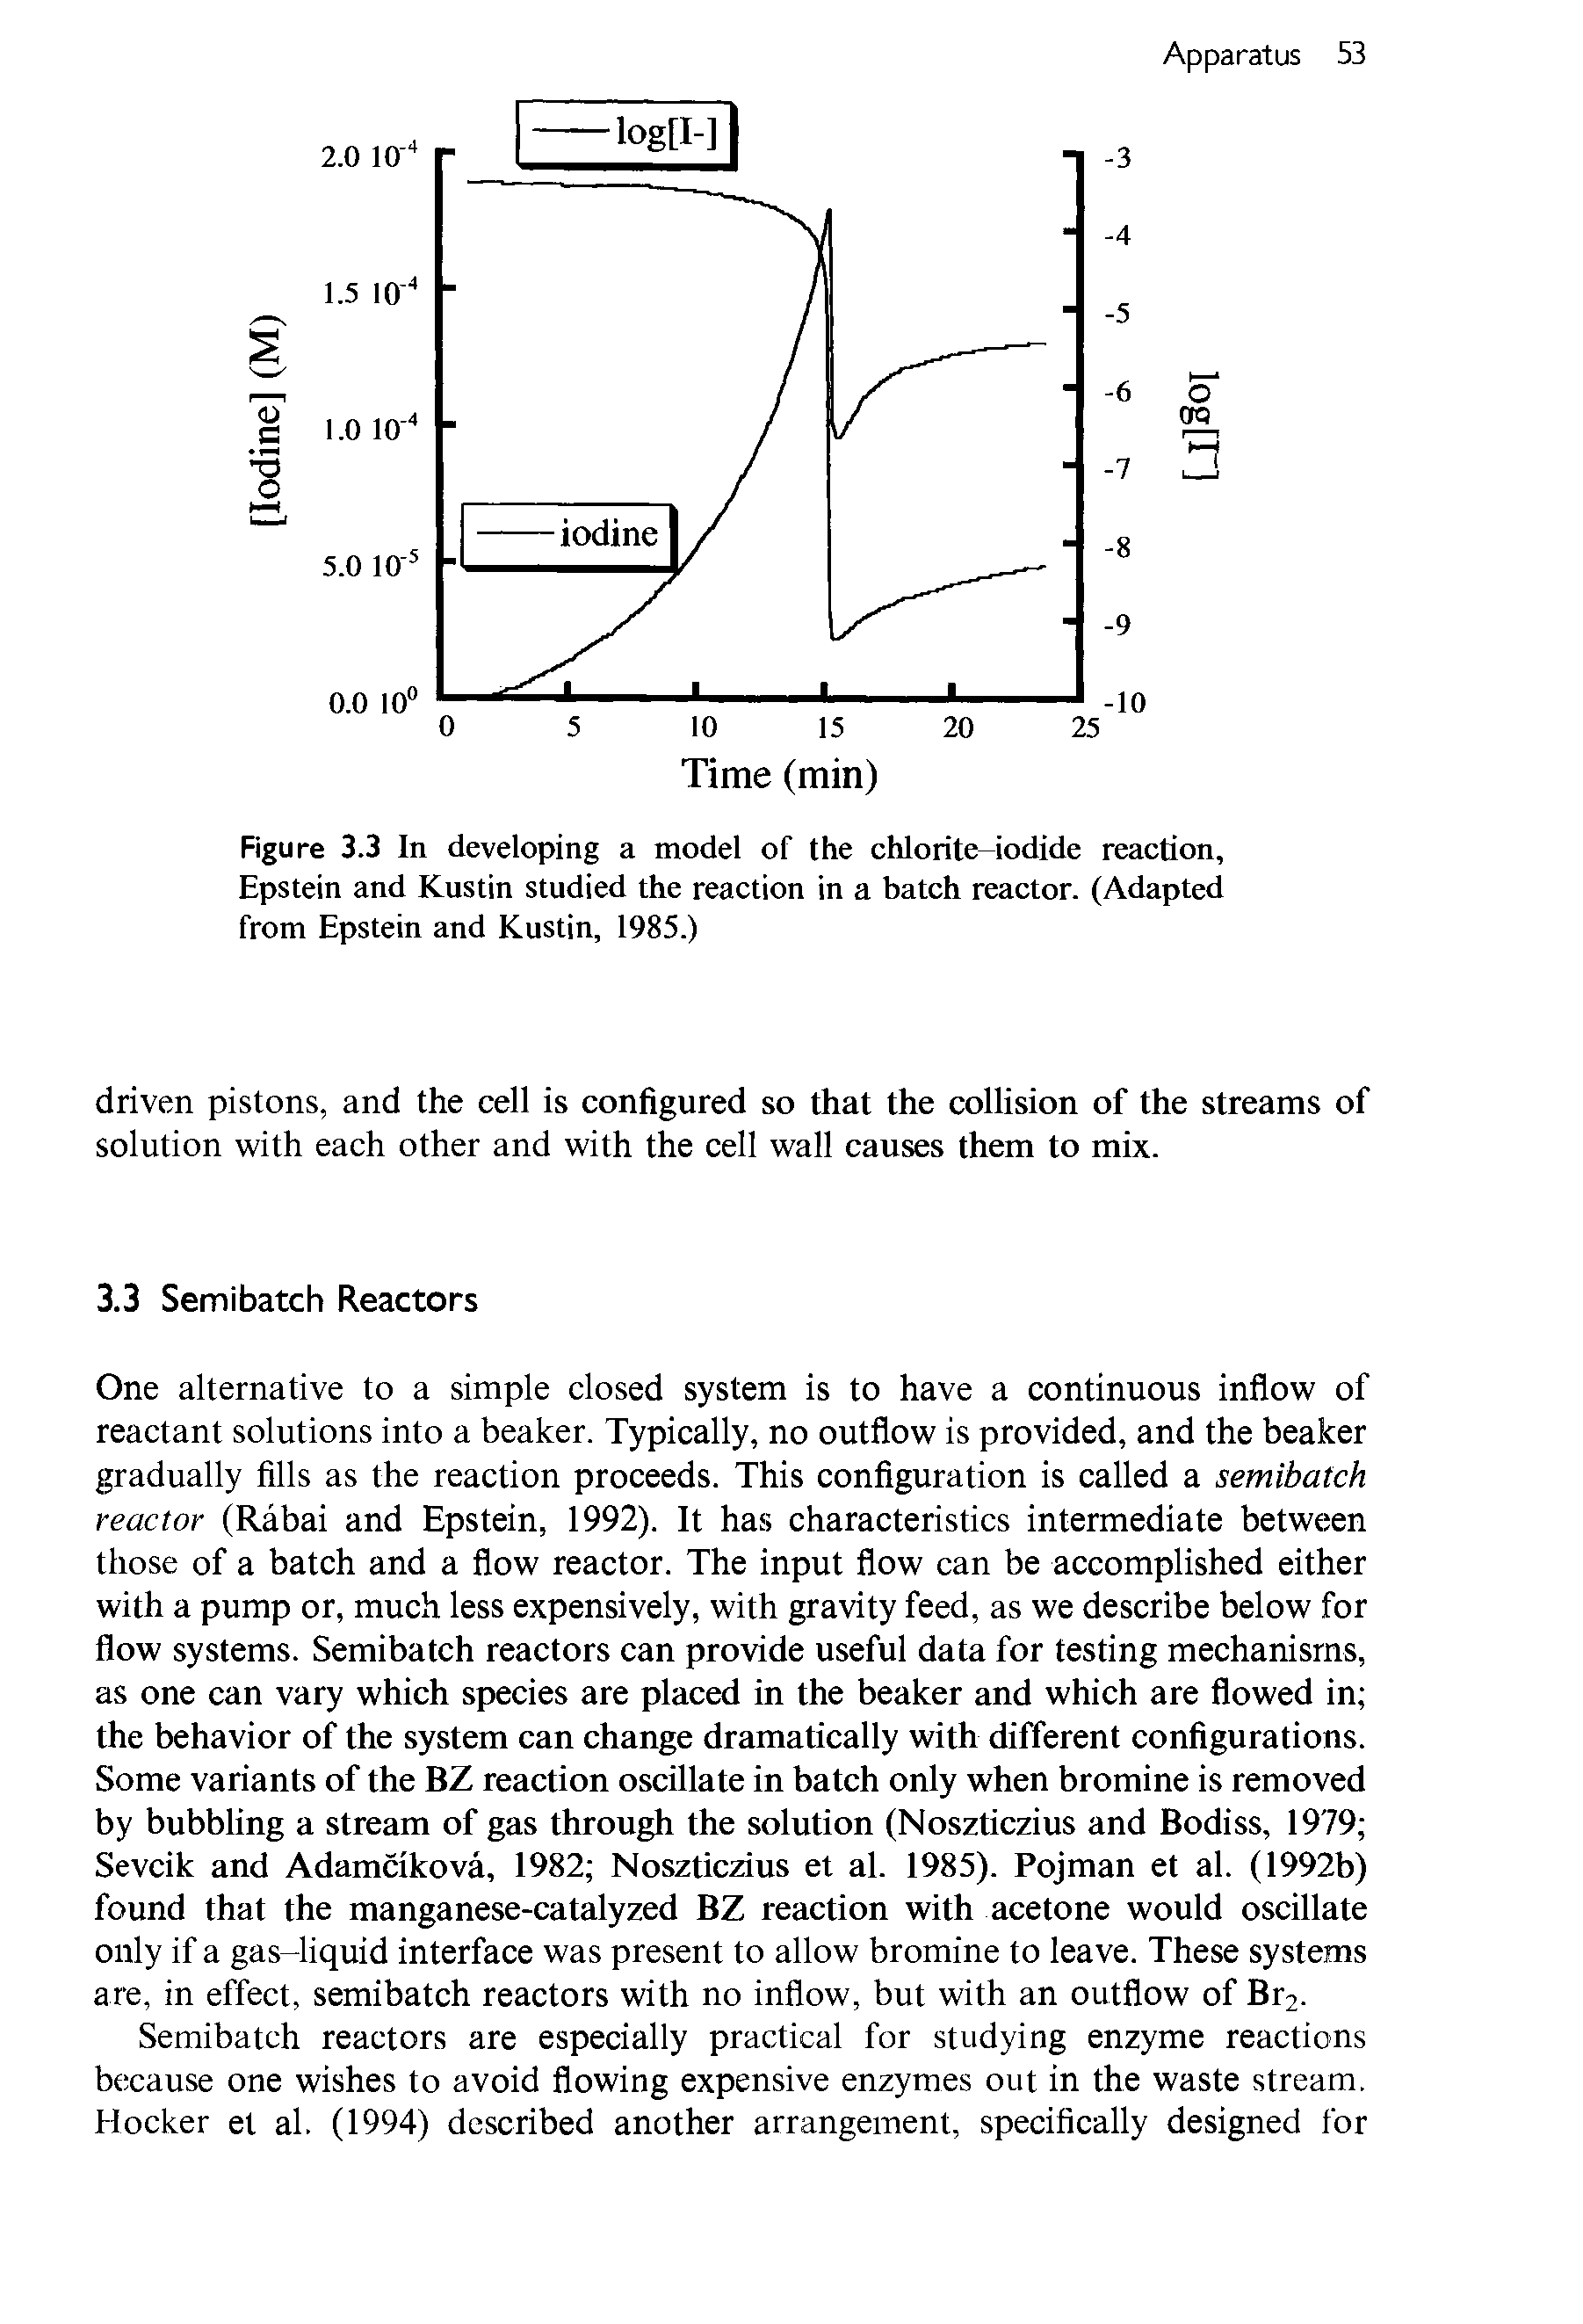 Figure 3.3 In developing a model of the chlorite-iodide reaction, Epstein and Kustin studied the reaction in a batch reactor. (Adapted from Epstein and Kustin, 1985.)...